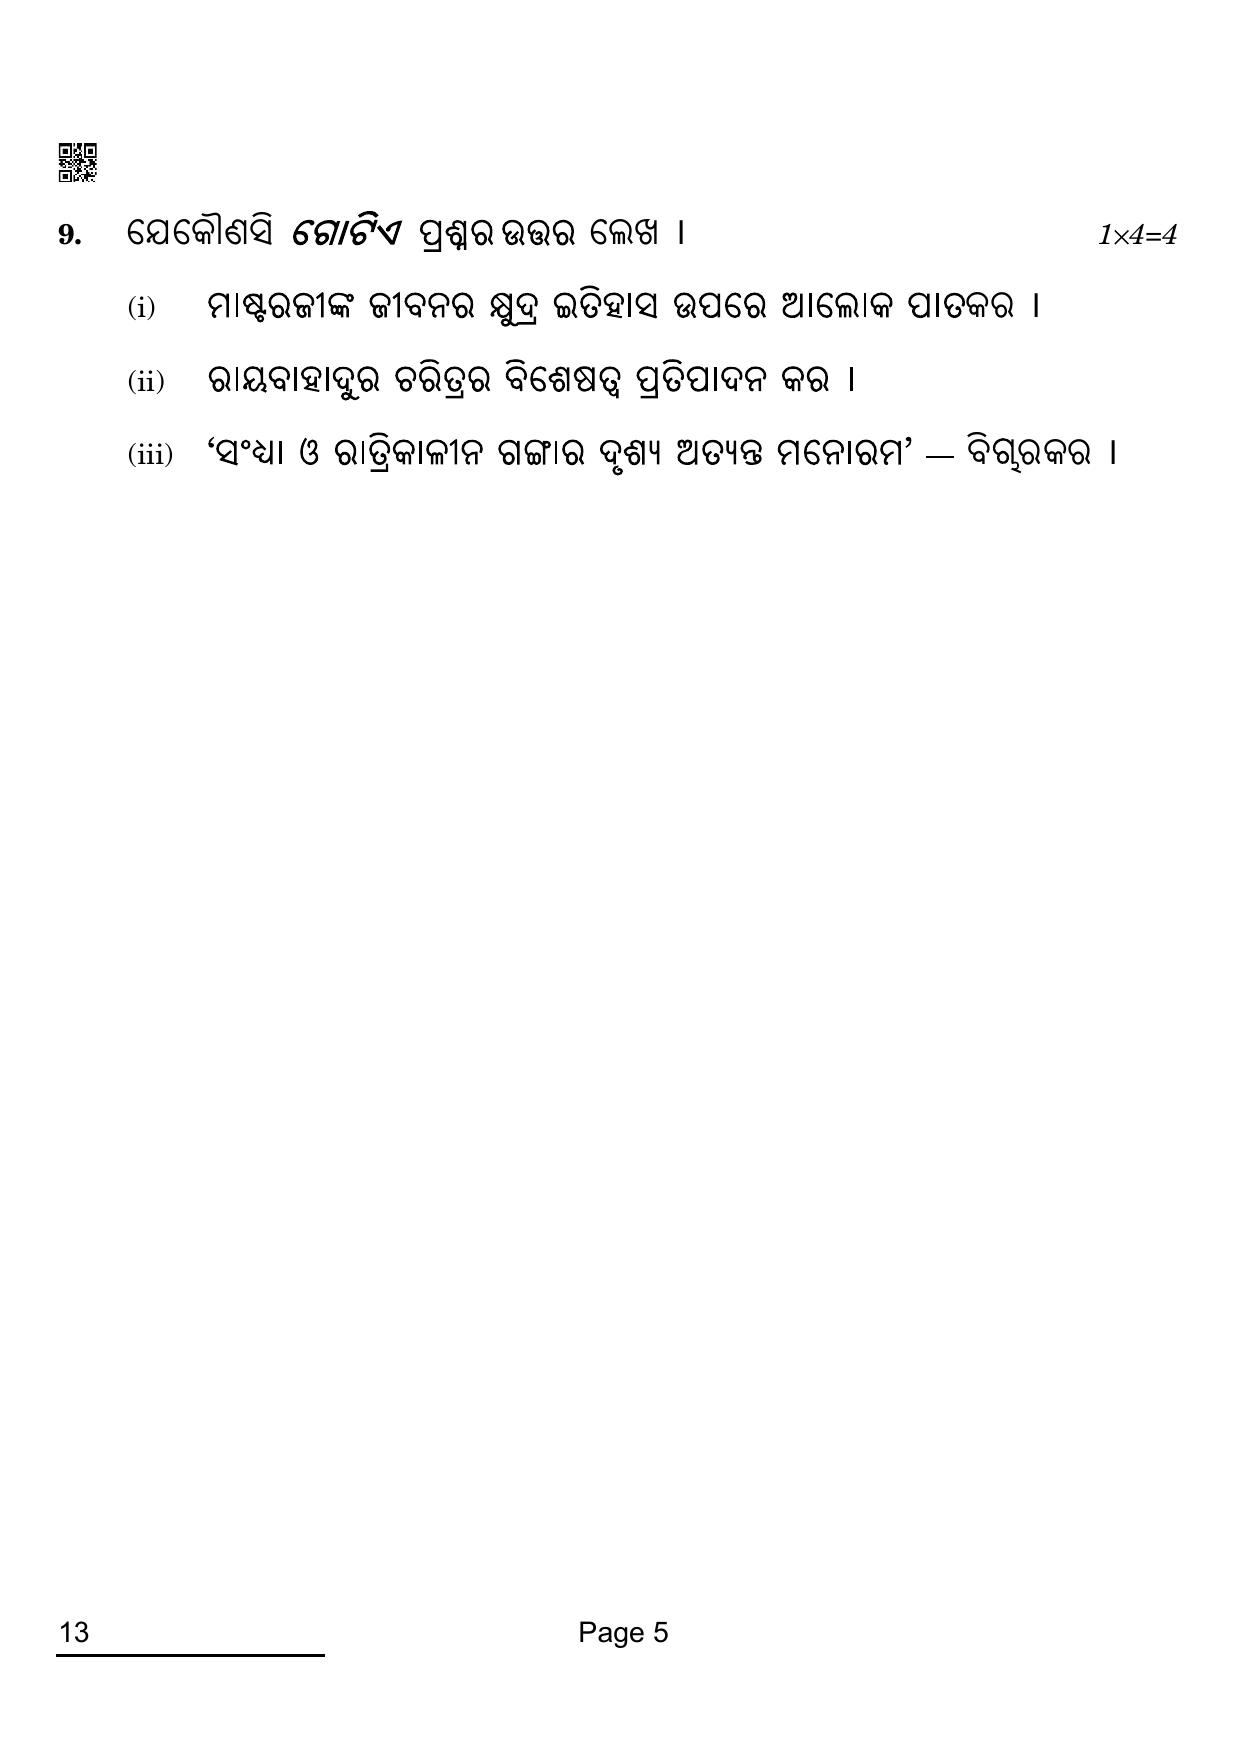 CBSE Class 12 13 ODIA 2022 Compartment Question Paper - Page 5